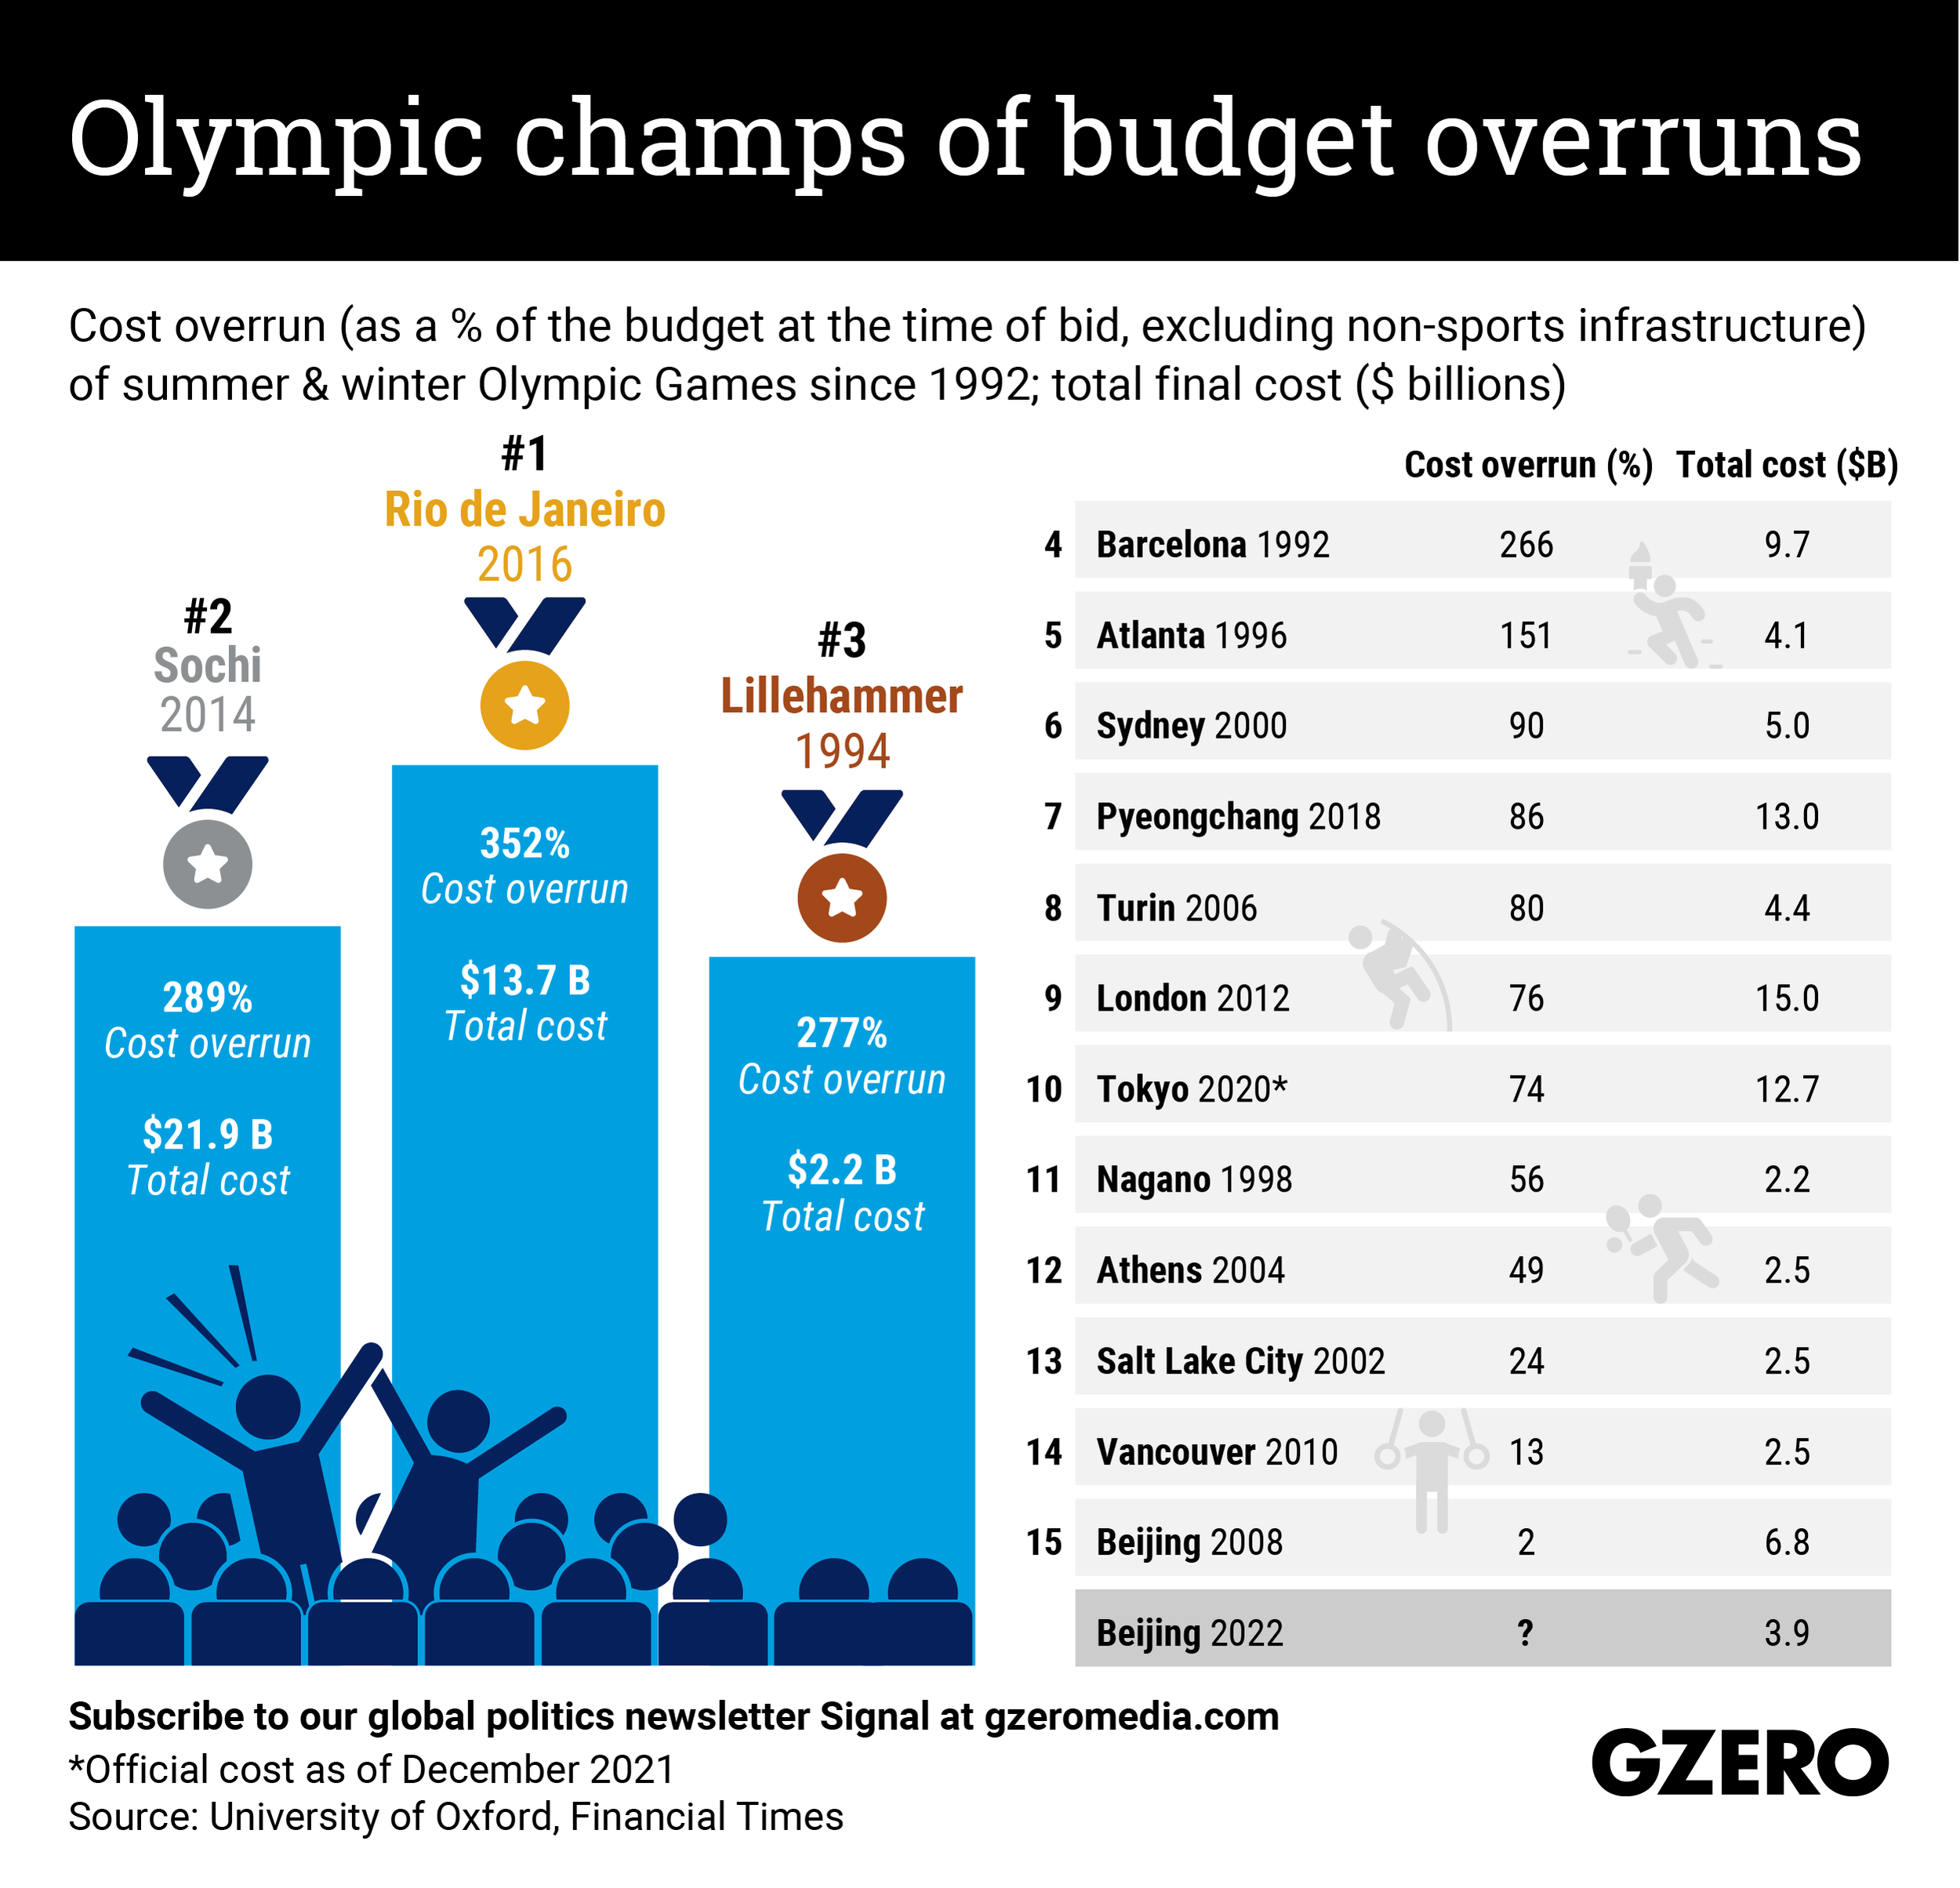 The Graphic Truth: Olympic champs of budget overruns